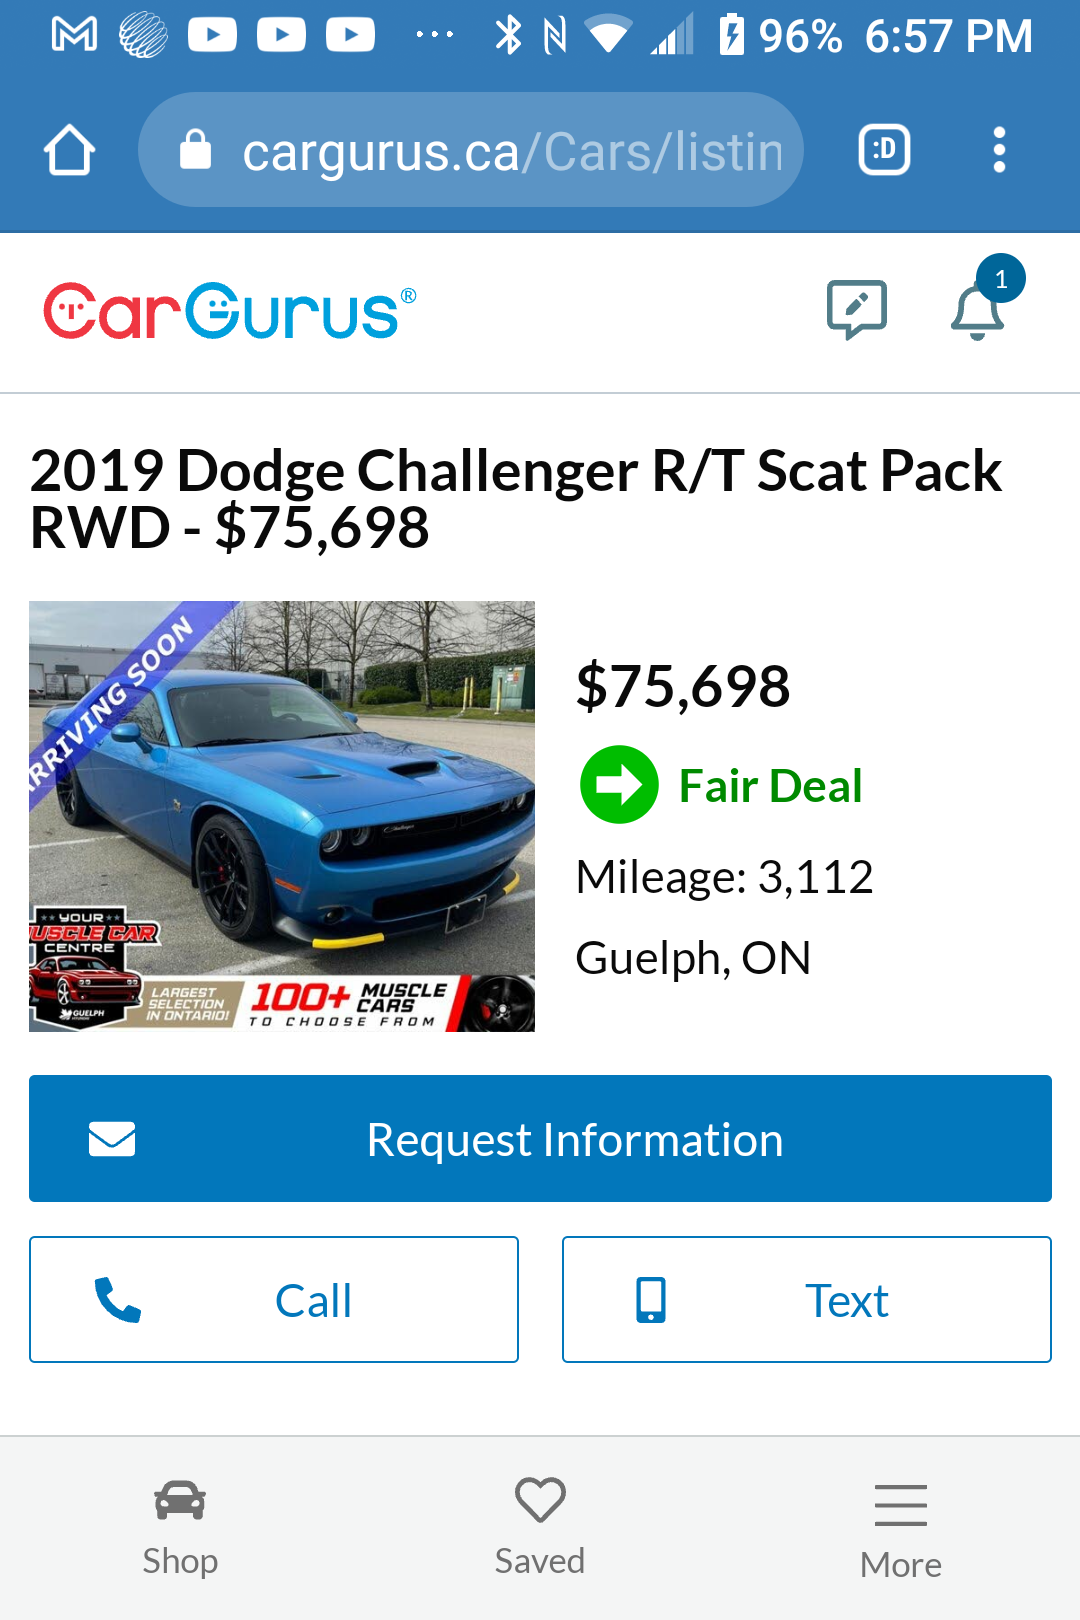 Ad for my Challenger in Guelph, Ontario.